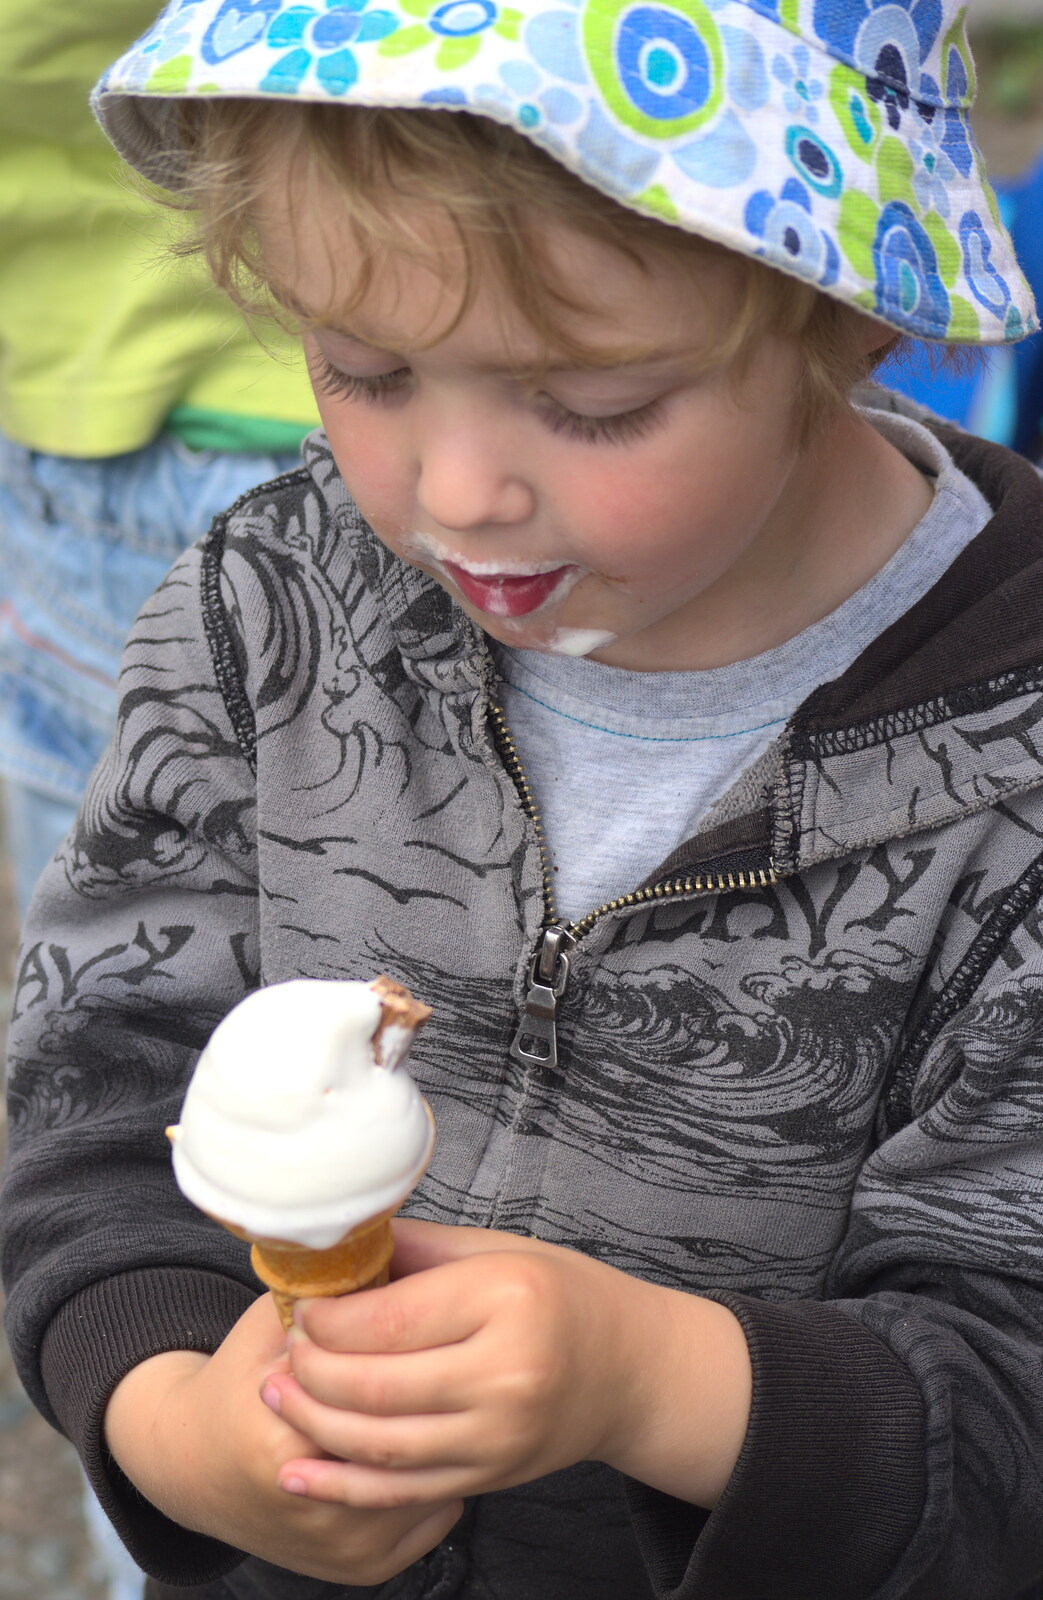 Fred contemplates an ice cream from Morris Dancing and a Carnival Procession, Diss, Norfolk - 17th June 2012